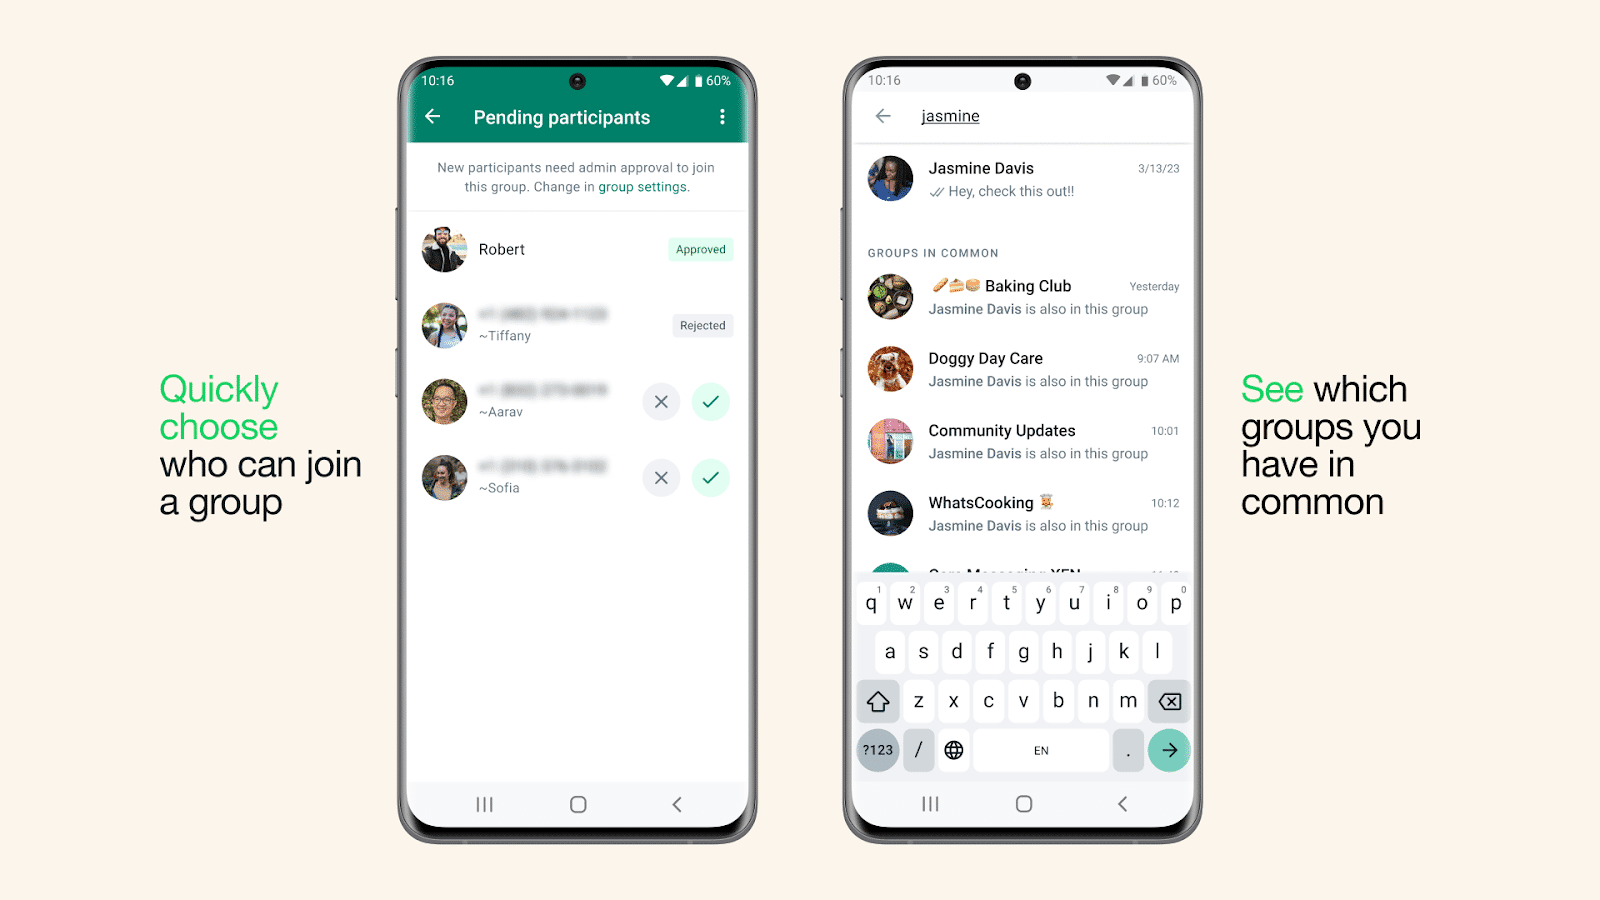 WhatsApp Introduces Group Chat Related Enhancements